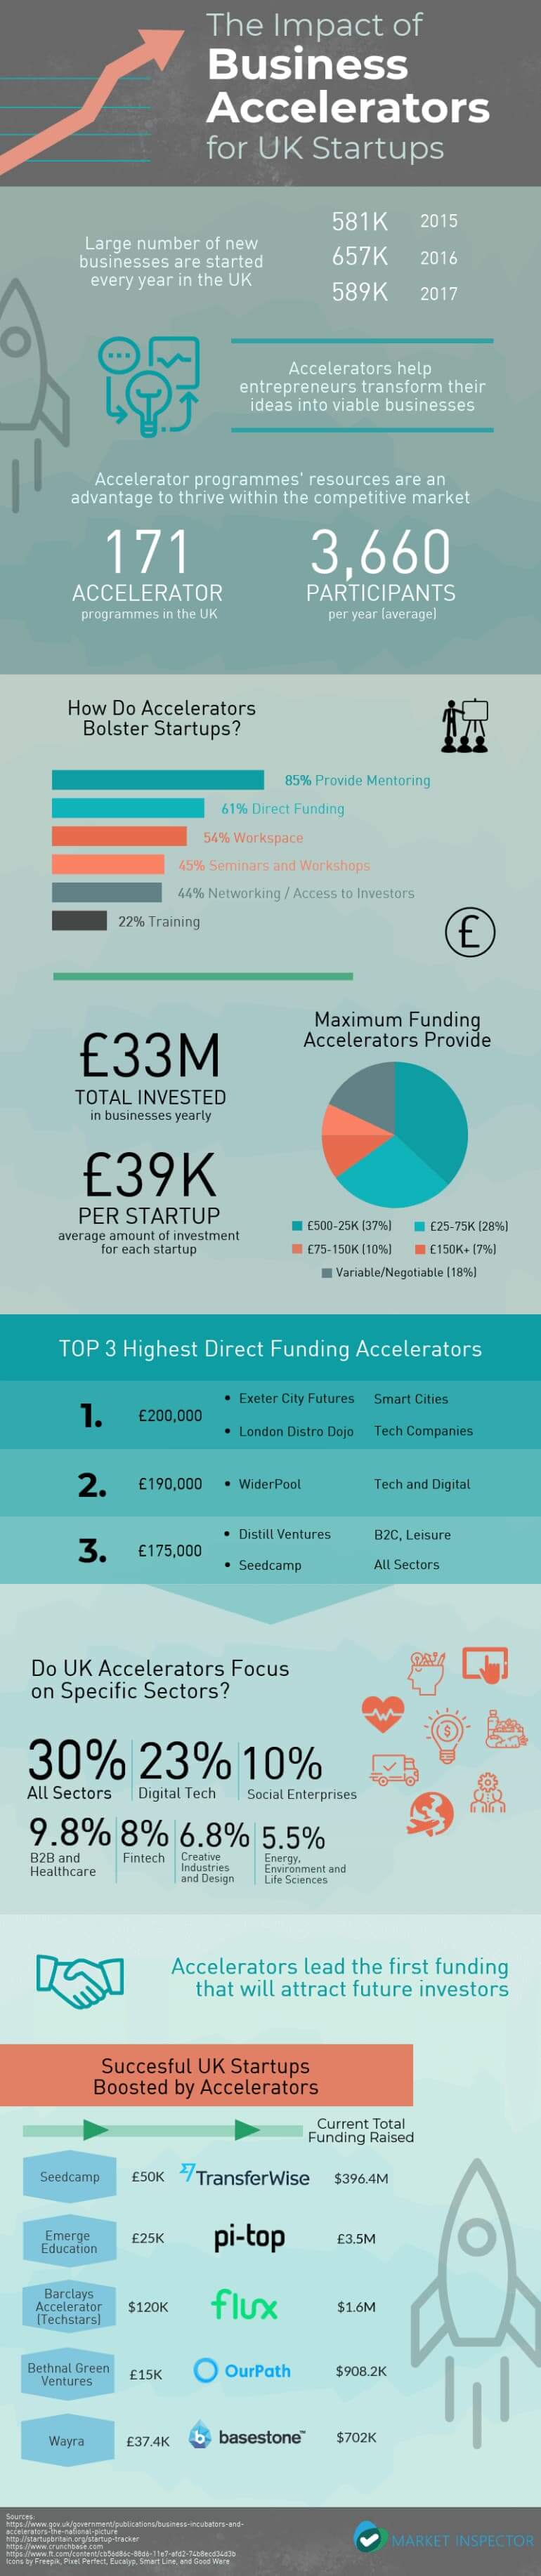 Impact of Business Accelerators for UK Startups